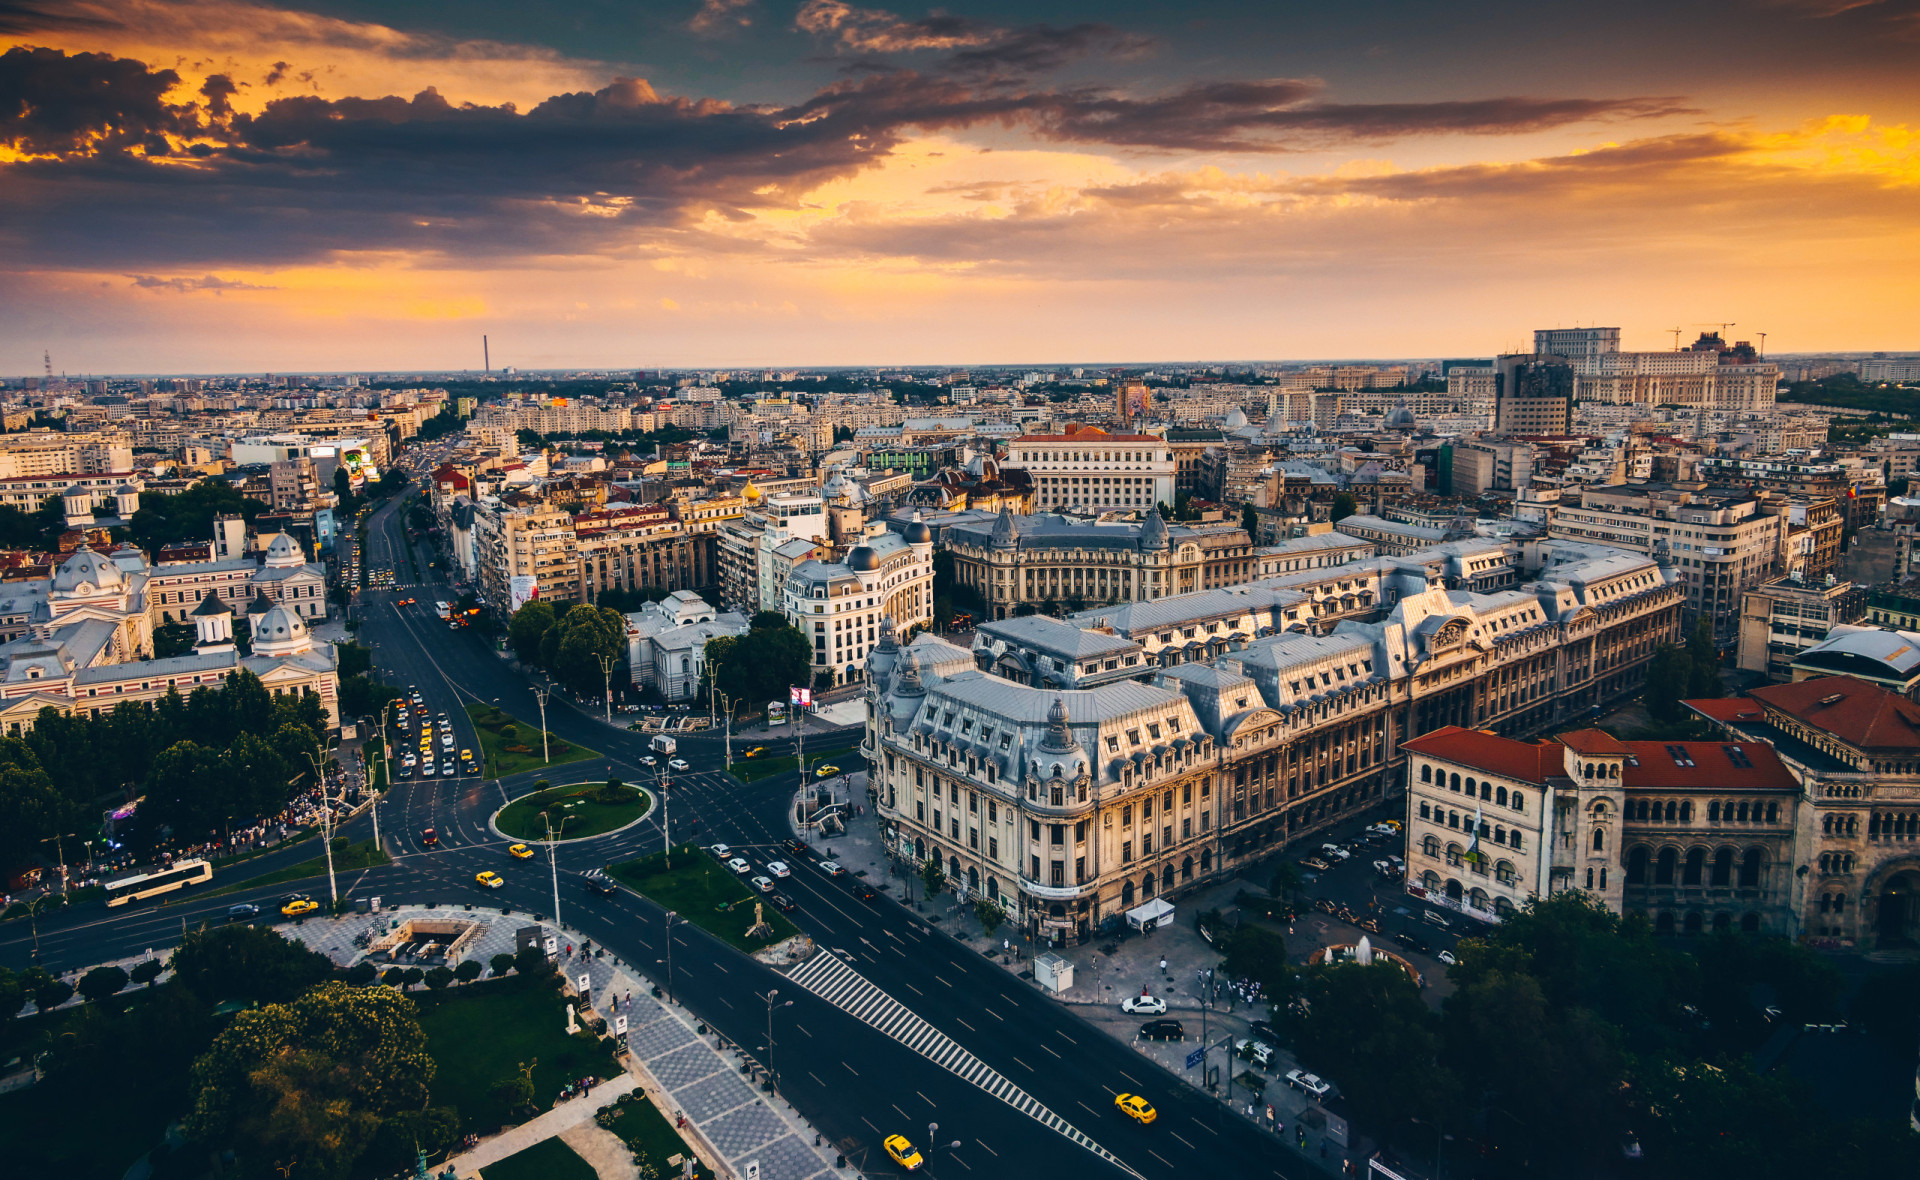 <p>Bucharest charges a tax of 1% of the hotel's room rate. Major cities charge a city tax, and mountain and sea towns charge a rescue tax.</p><p><a href="https://www.msn.com/en-ph/community/channel/vid-7xx8mnucu55yw63we9va2gwr7uihbxwc68fxqp25x6tg4ftibpra?cvid=94631541bc0f4f89bfd59158d696ad7e">Follow us and access great exclusive content every day</a></p>